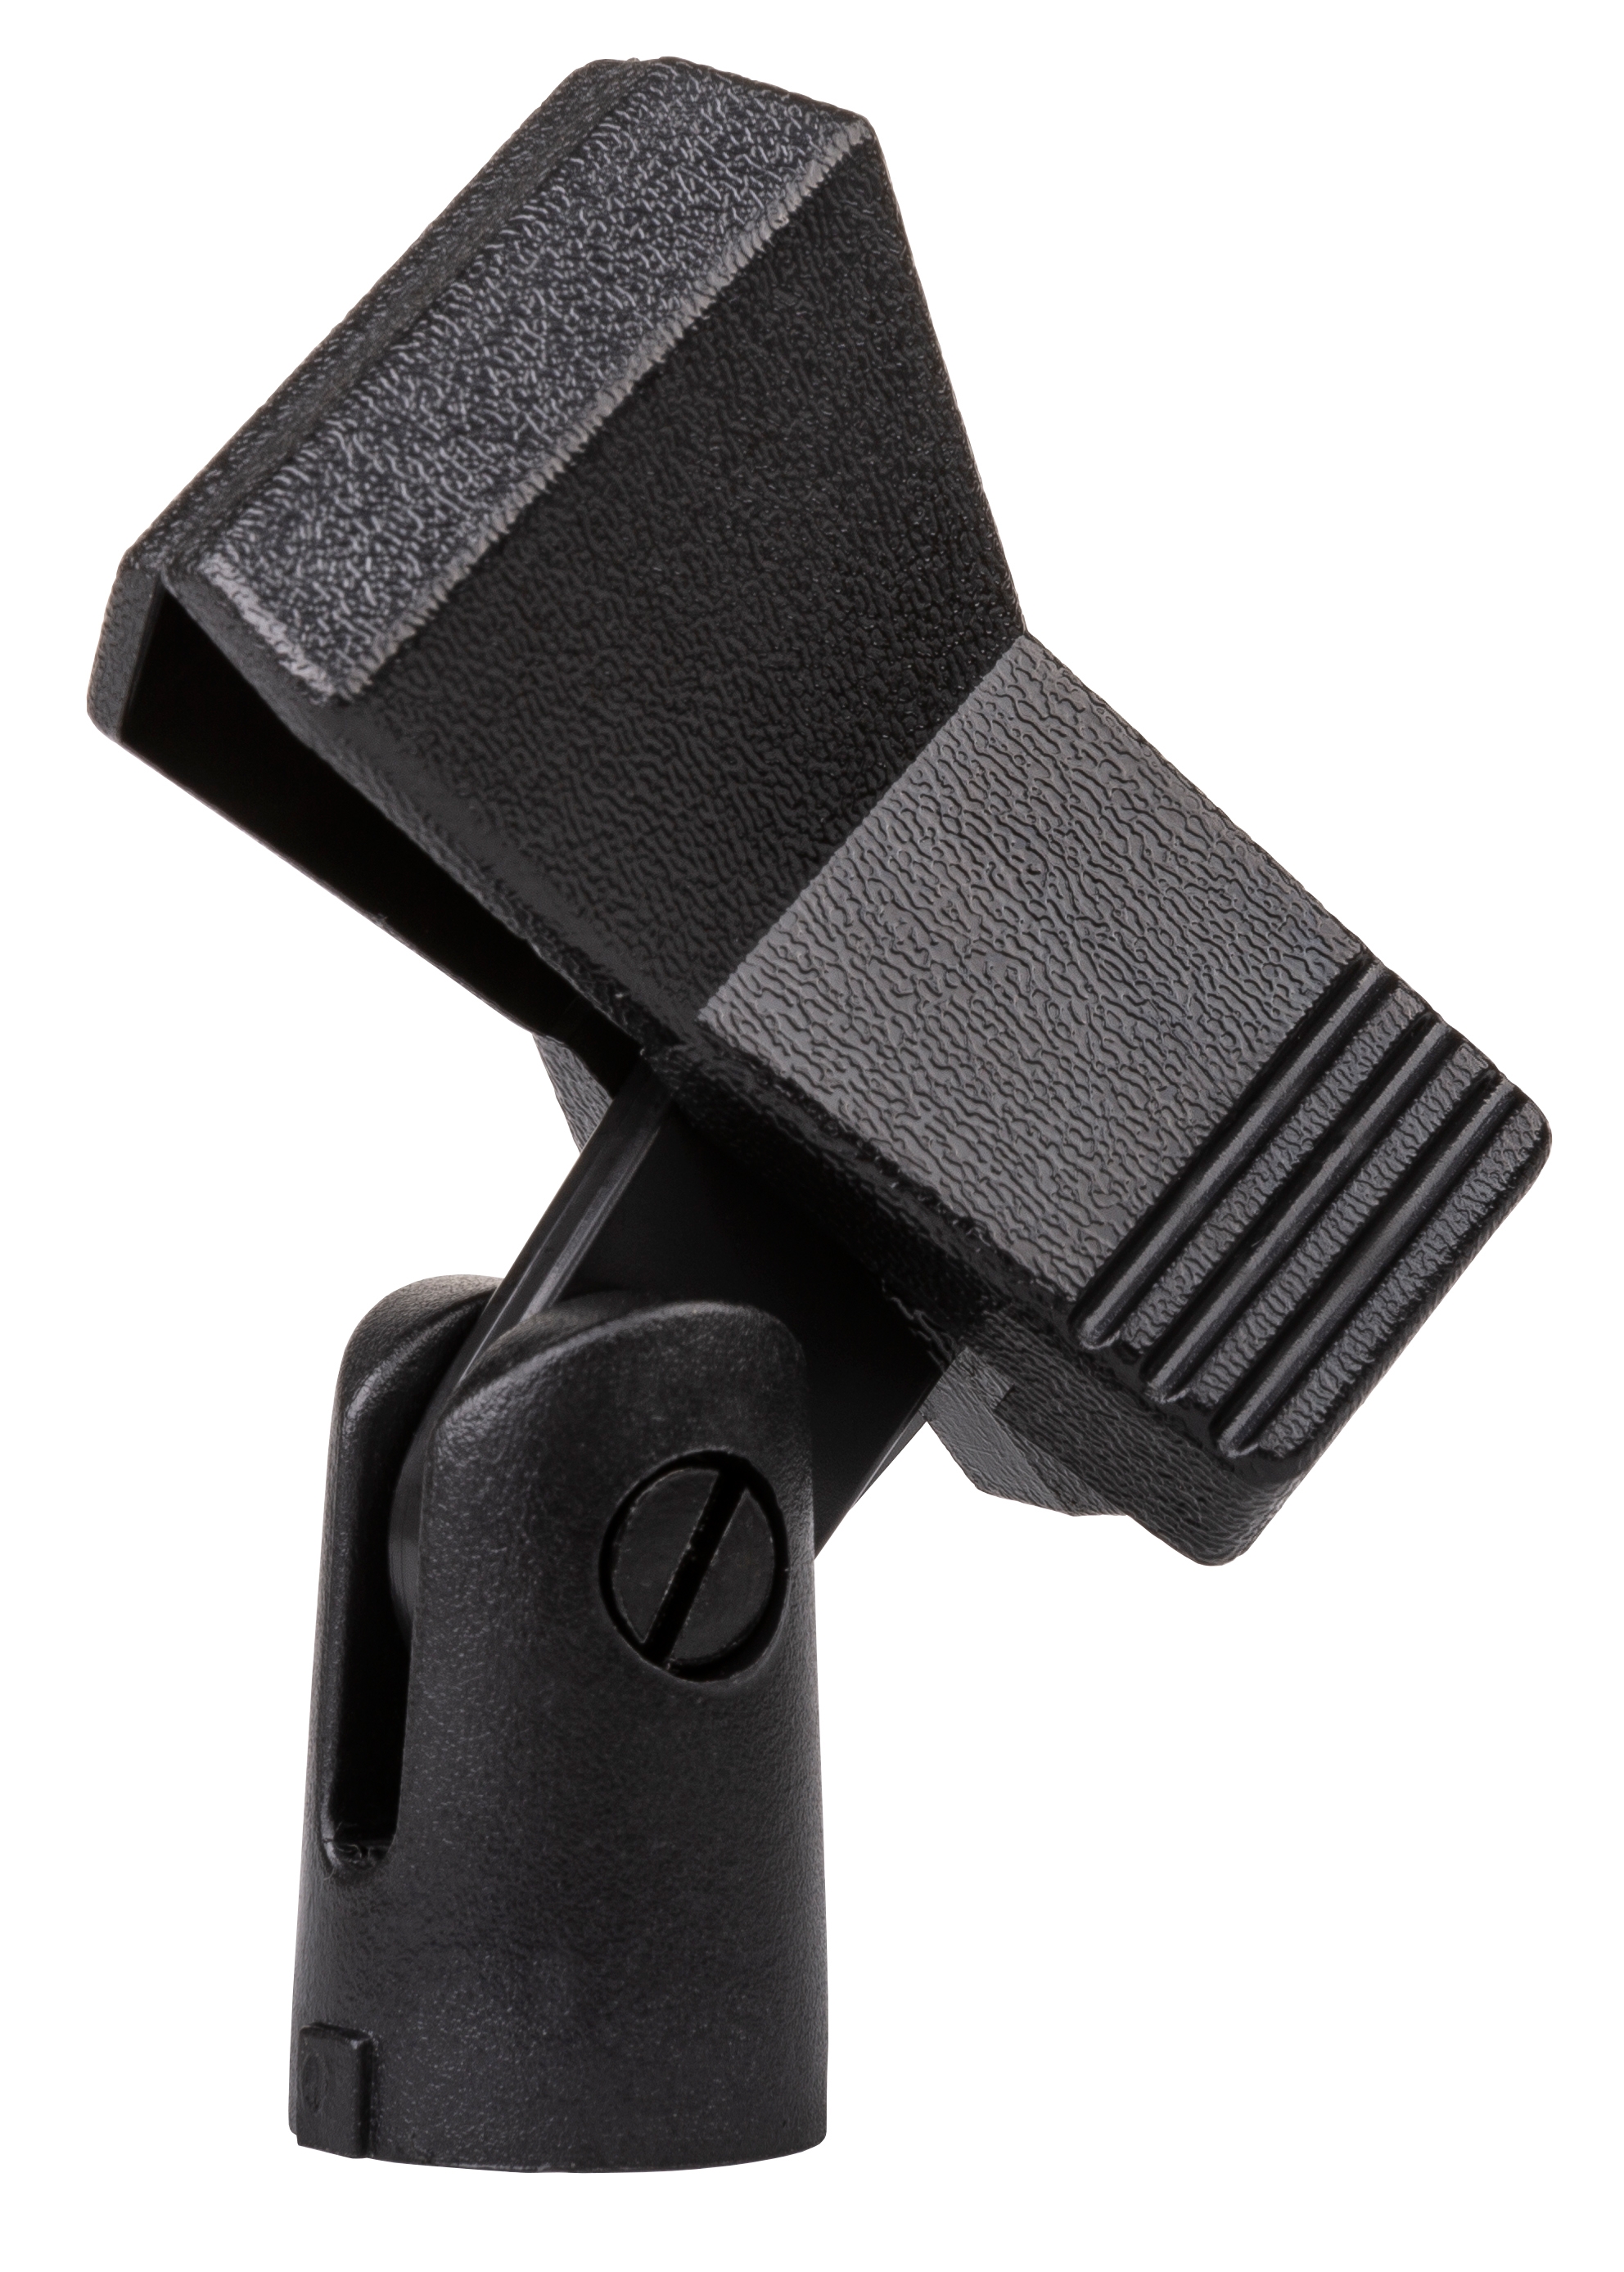 Microphone holder with squeeze spring for both wired and wireless handheld microphones